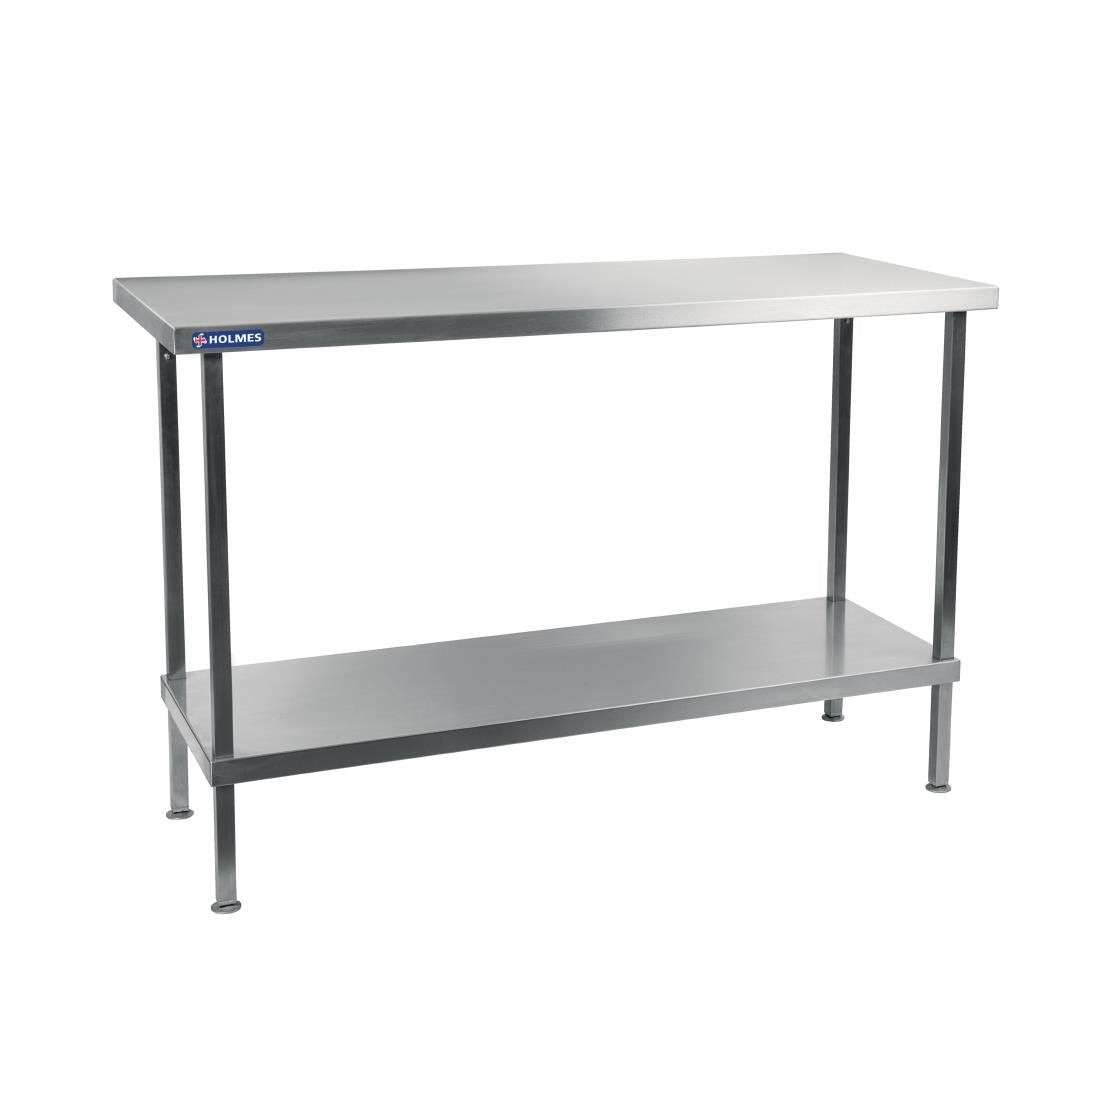 DR055 Holmes Stainless Steel Centre Table 900mm JD Catering Equipment Solutions Ltd